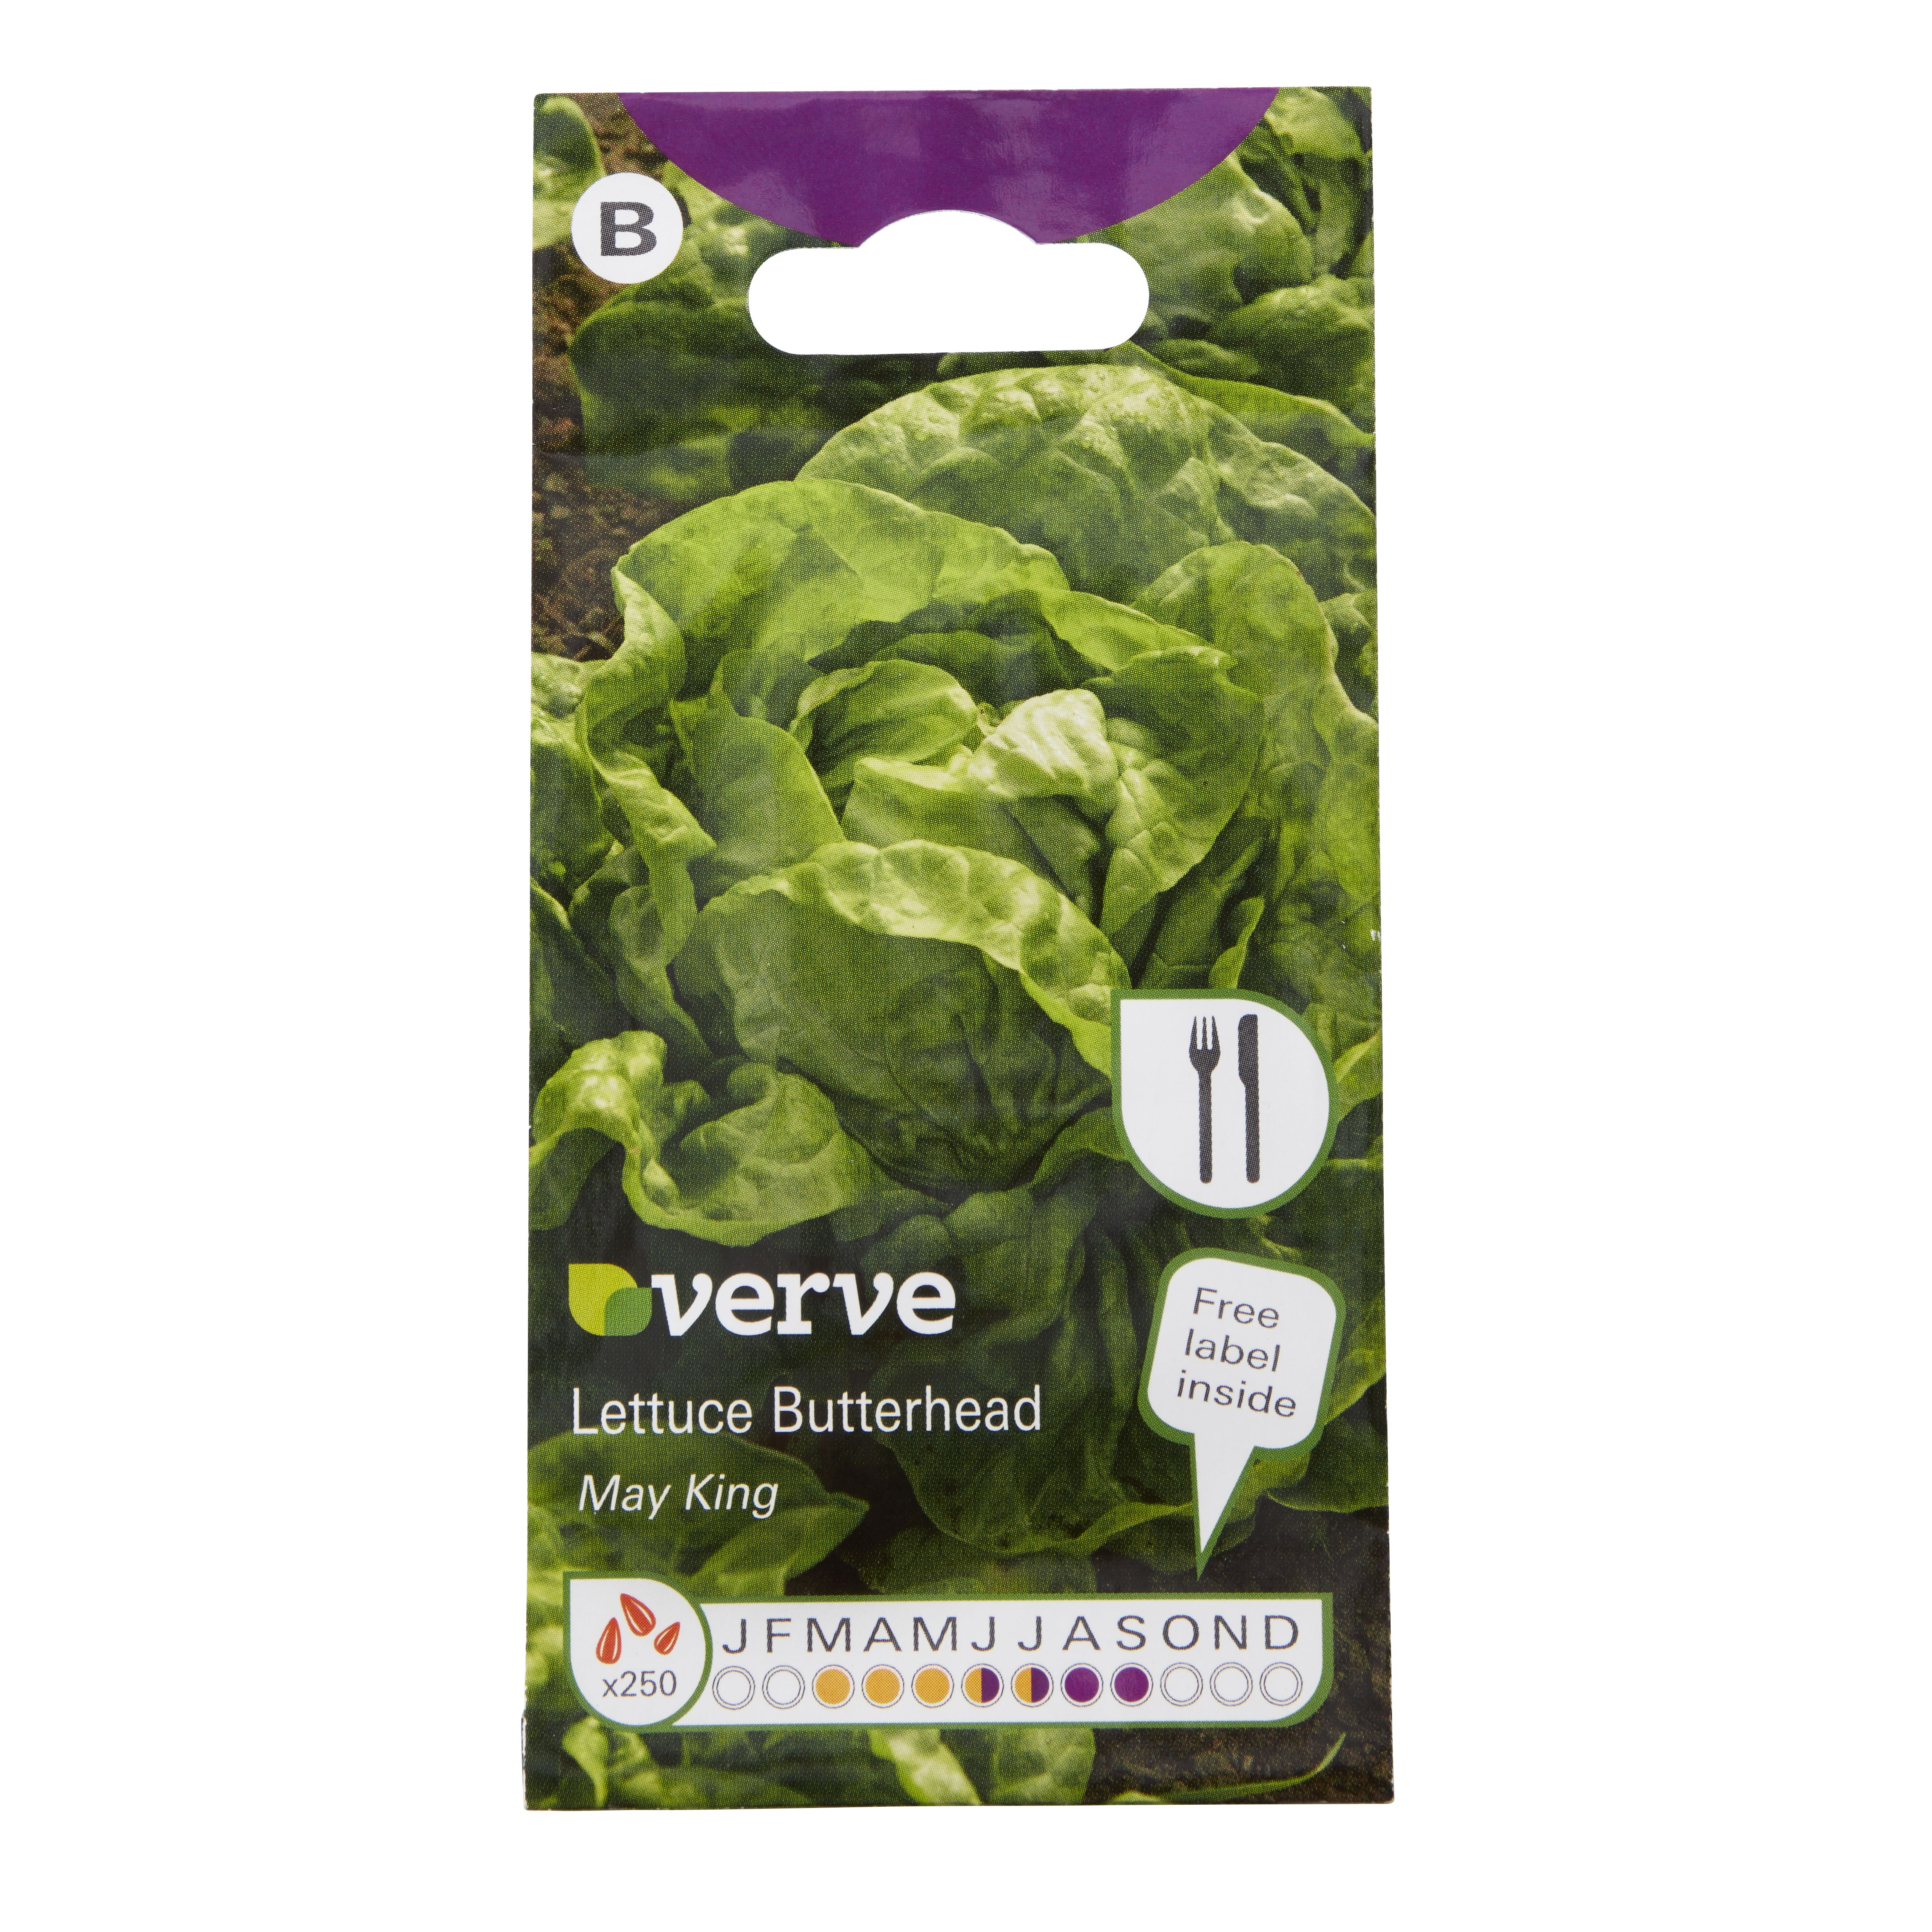 May King lettuce Seed